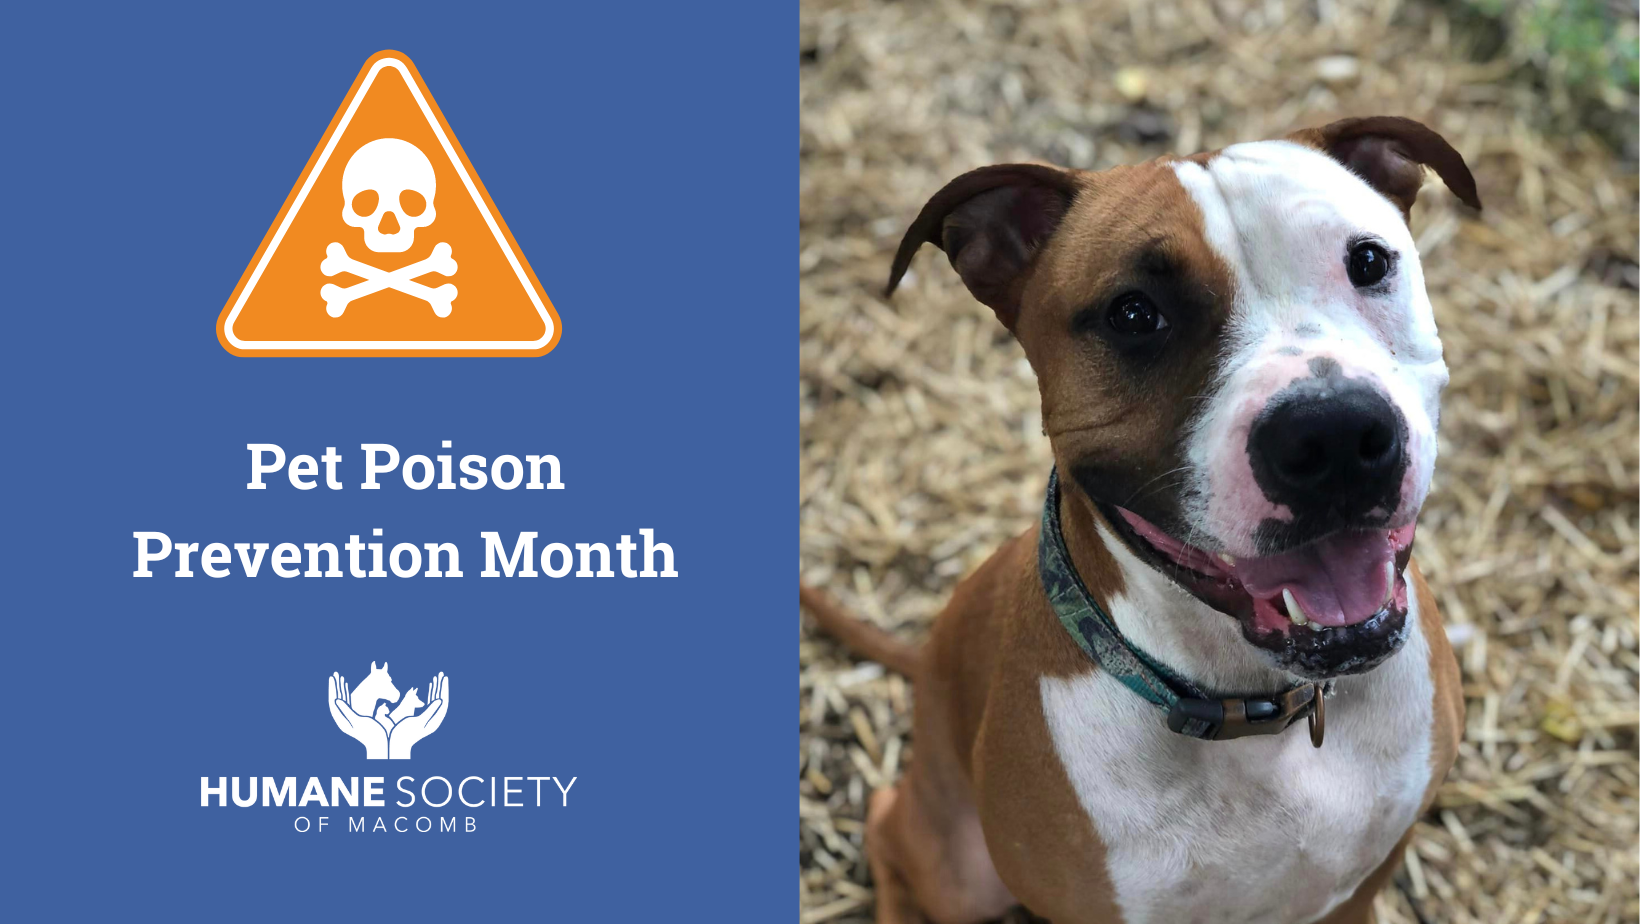 Vegas wants to let you know that March is National Poison Awareness month and we have some VERY special guests who are ready to share some pet poison prevention tips!